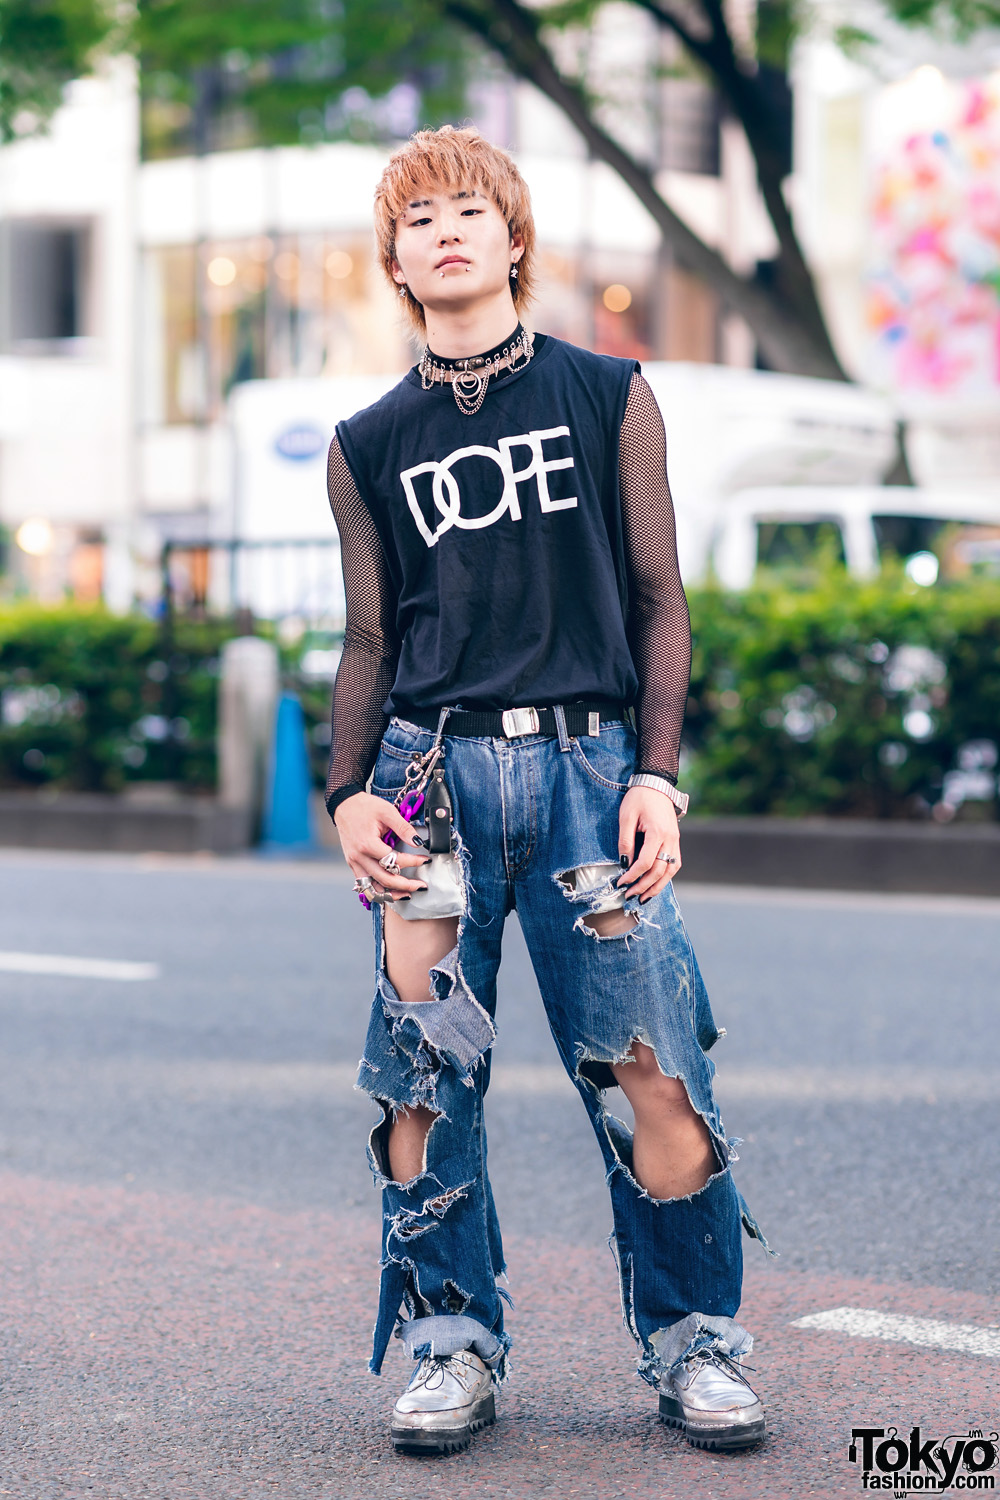 dope ripped jeans